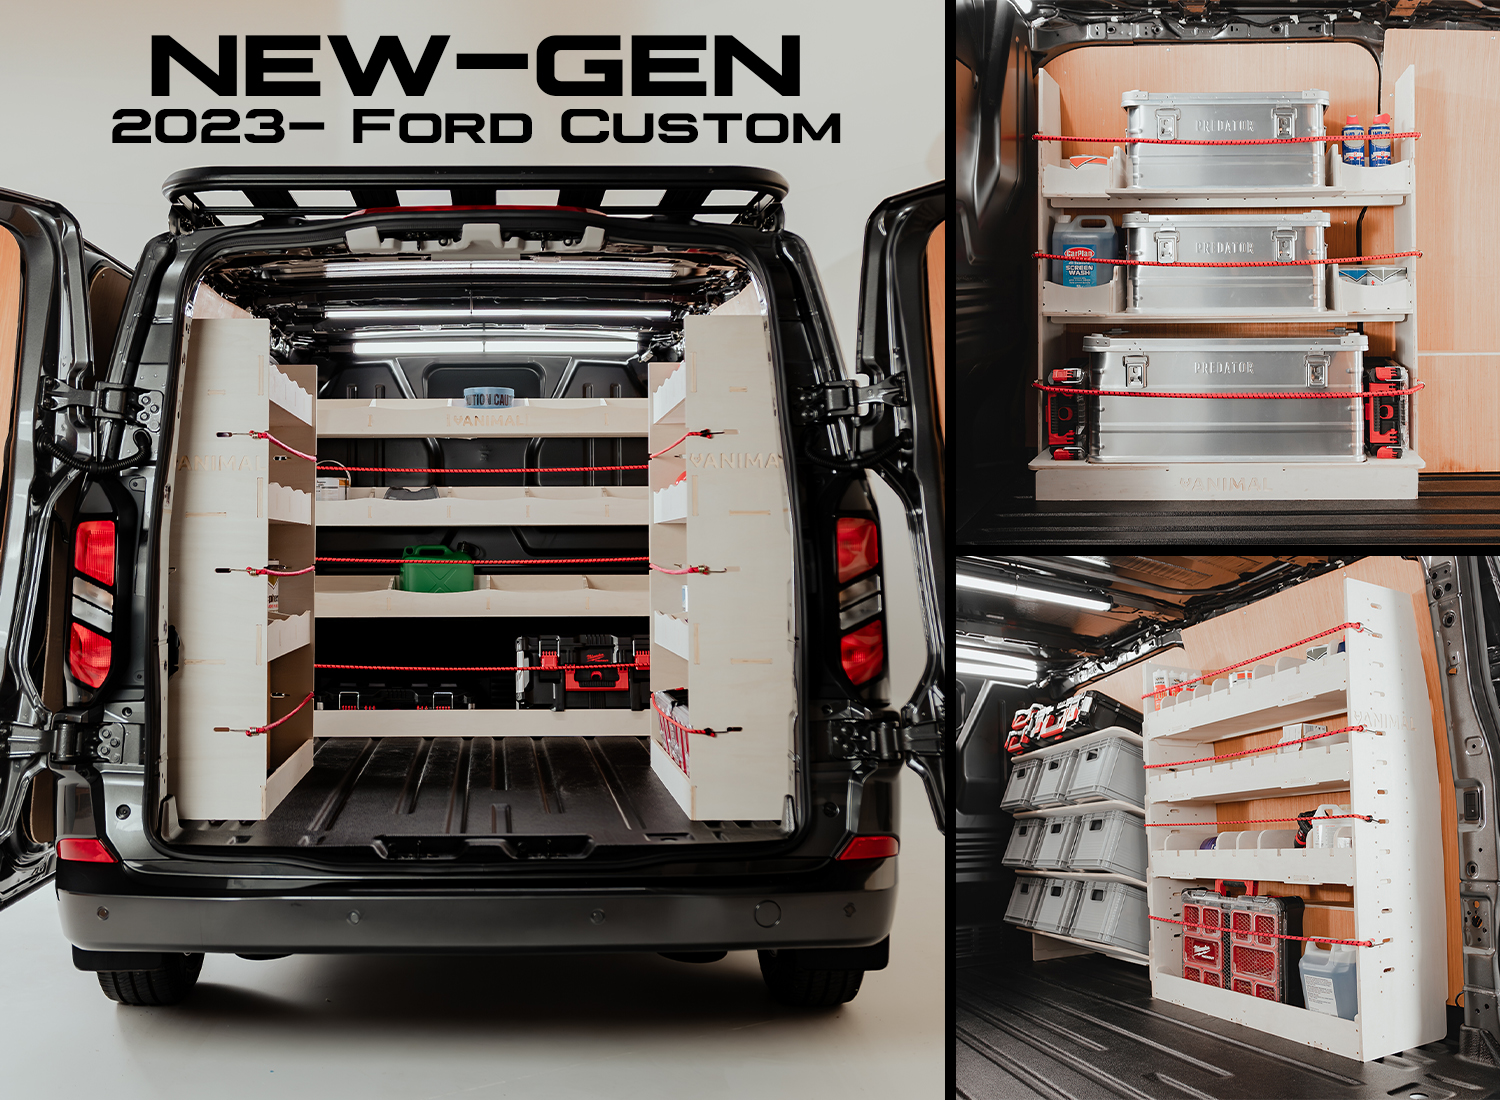 Maximise storage space your new-gen 2023- Ford Custom